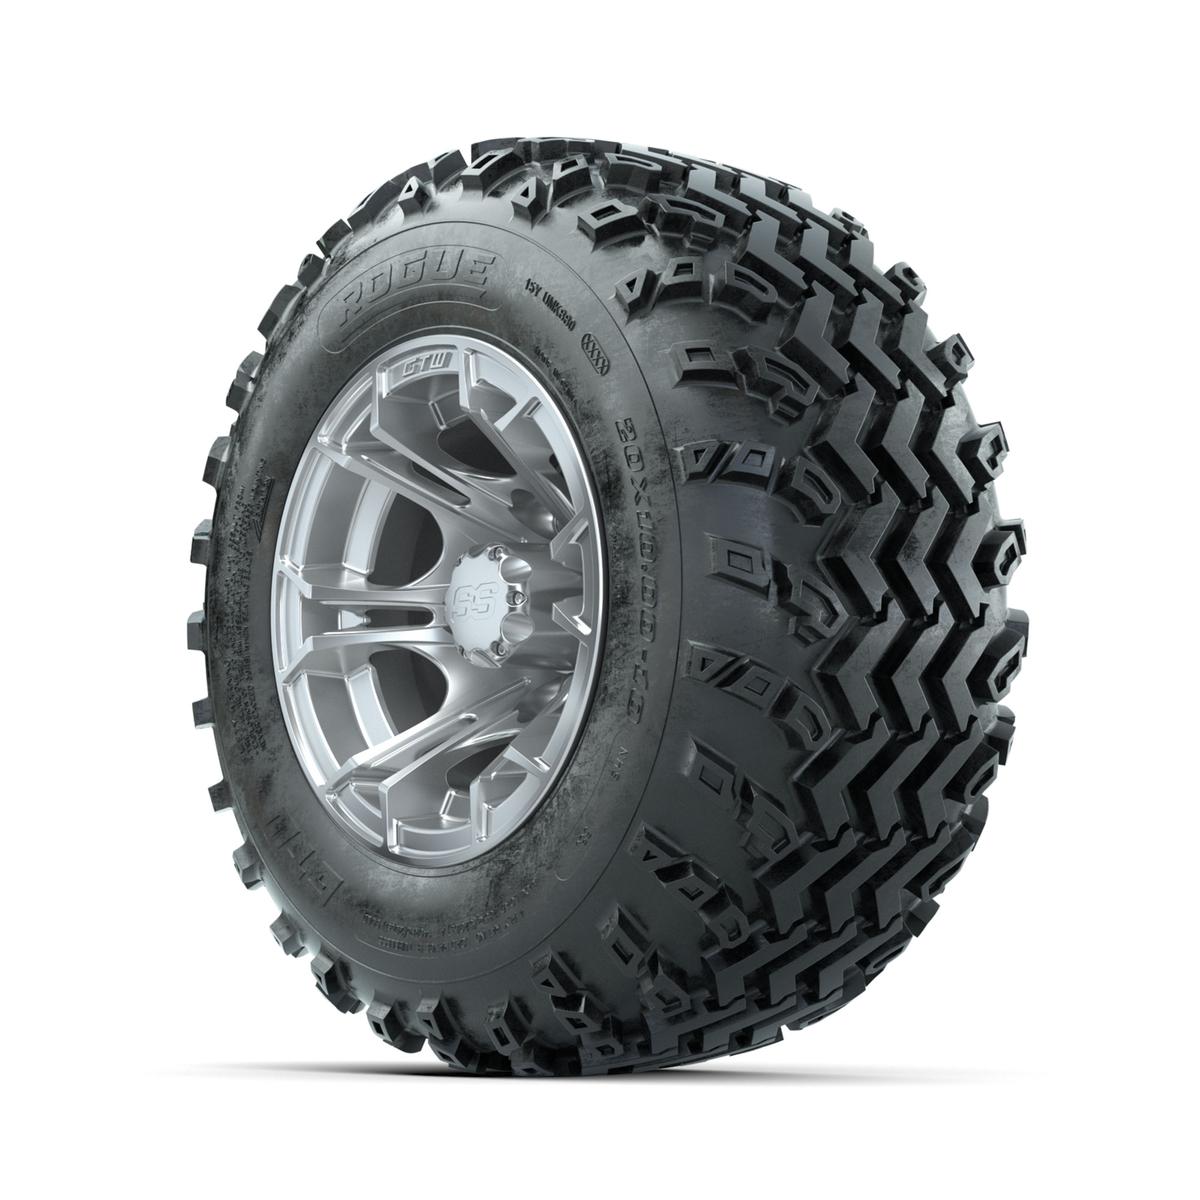 GTW Spyder Silver 10 in Wheels with 20x10.00-10 Rogue All Terrain Tires – Full Set